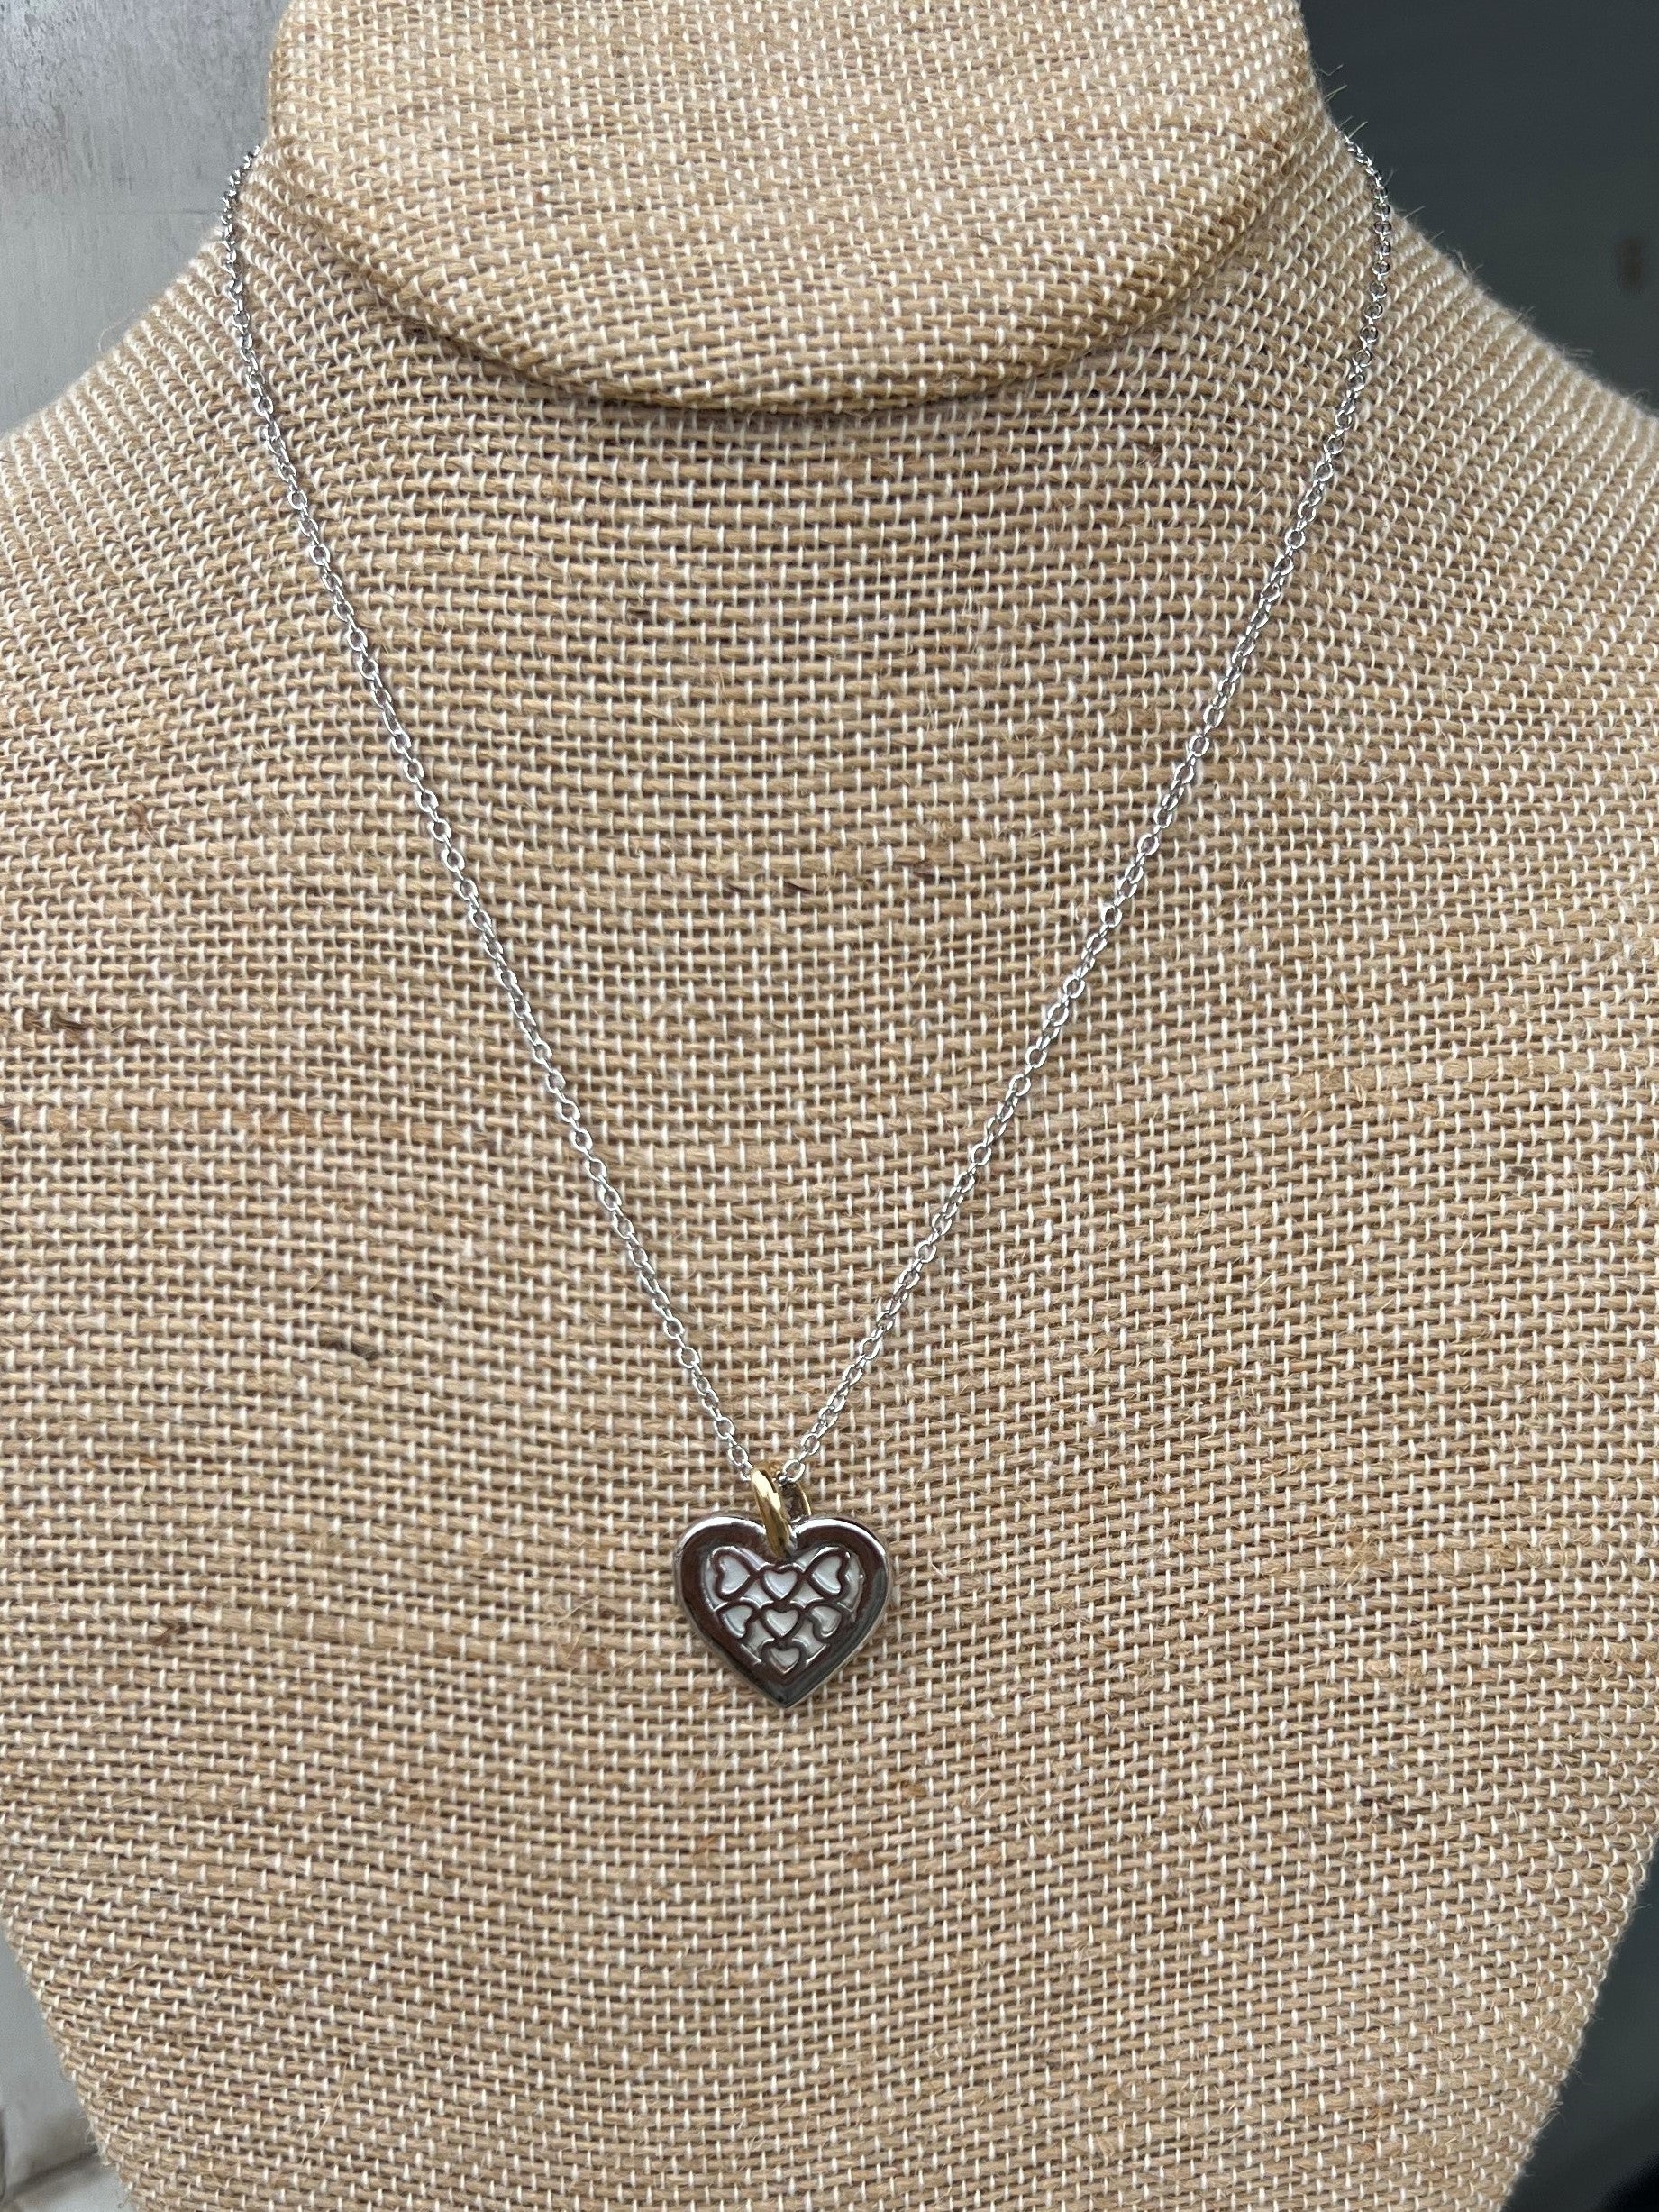 Silver Heart Necklace Trimmed in Rhinestones